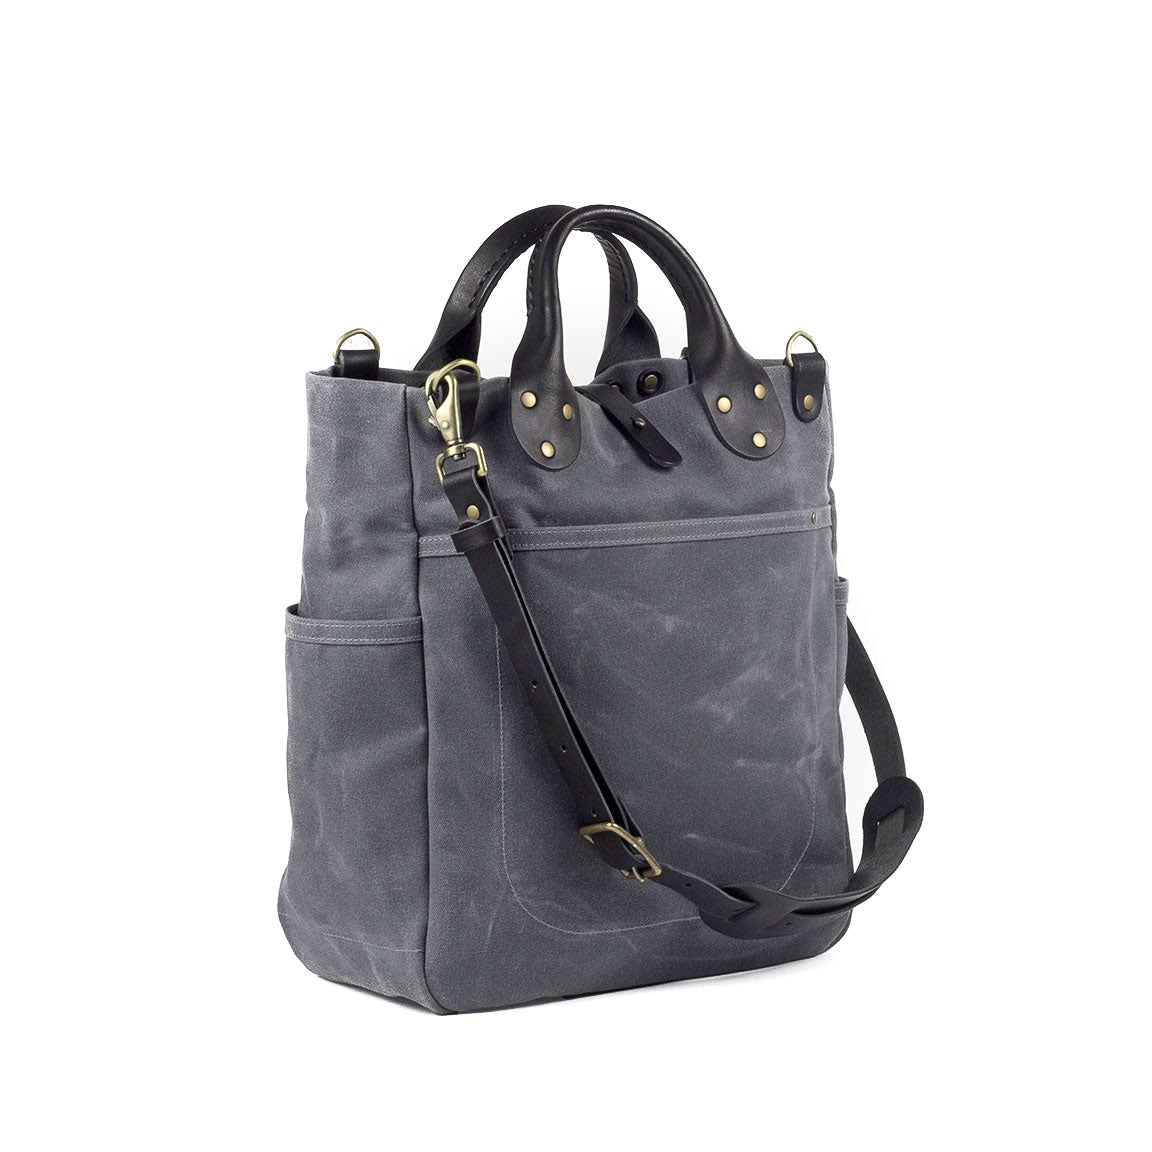 Carryall Grey Waxed Canvas & Black Leather